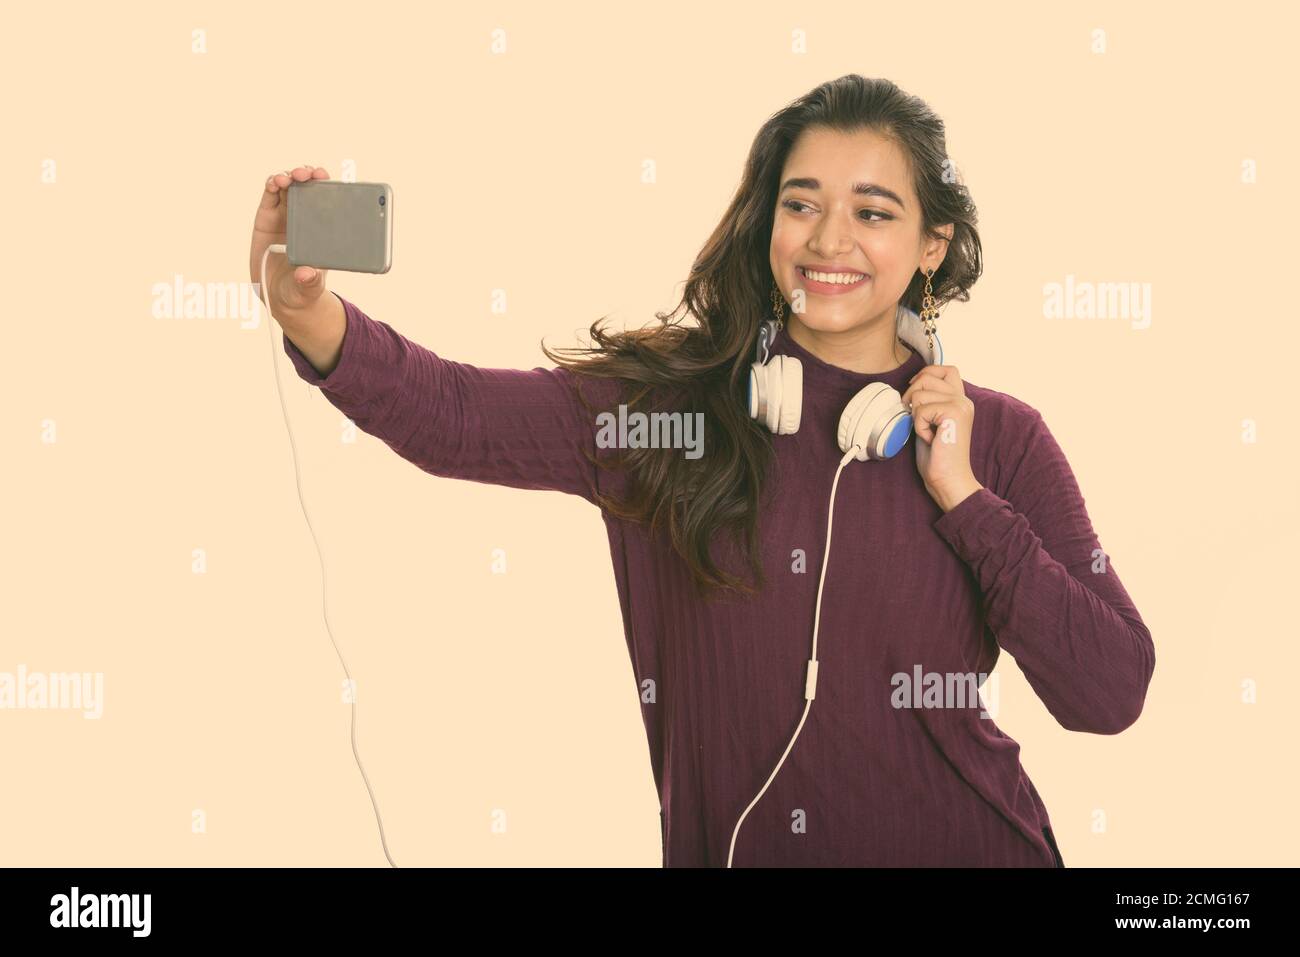 Young happy Indian woman smiling while wearing headphones around neck and taking selfie picture with mobile phone Stock Photo